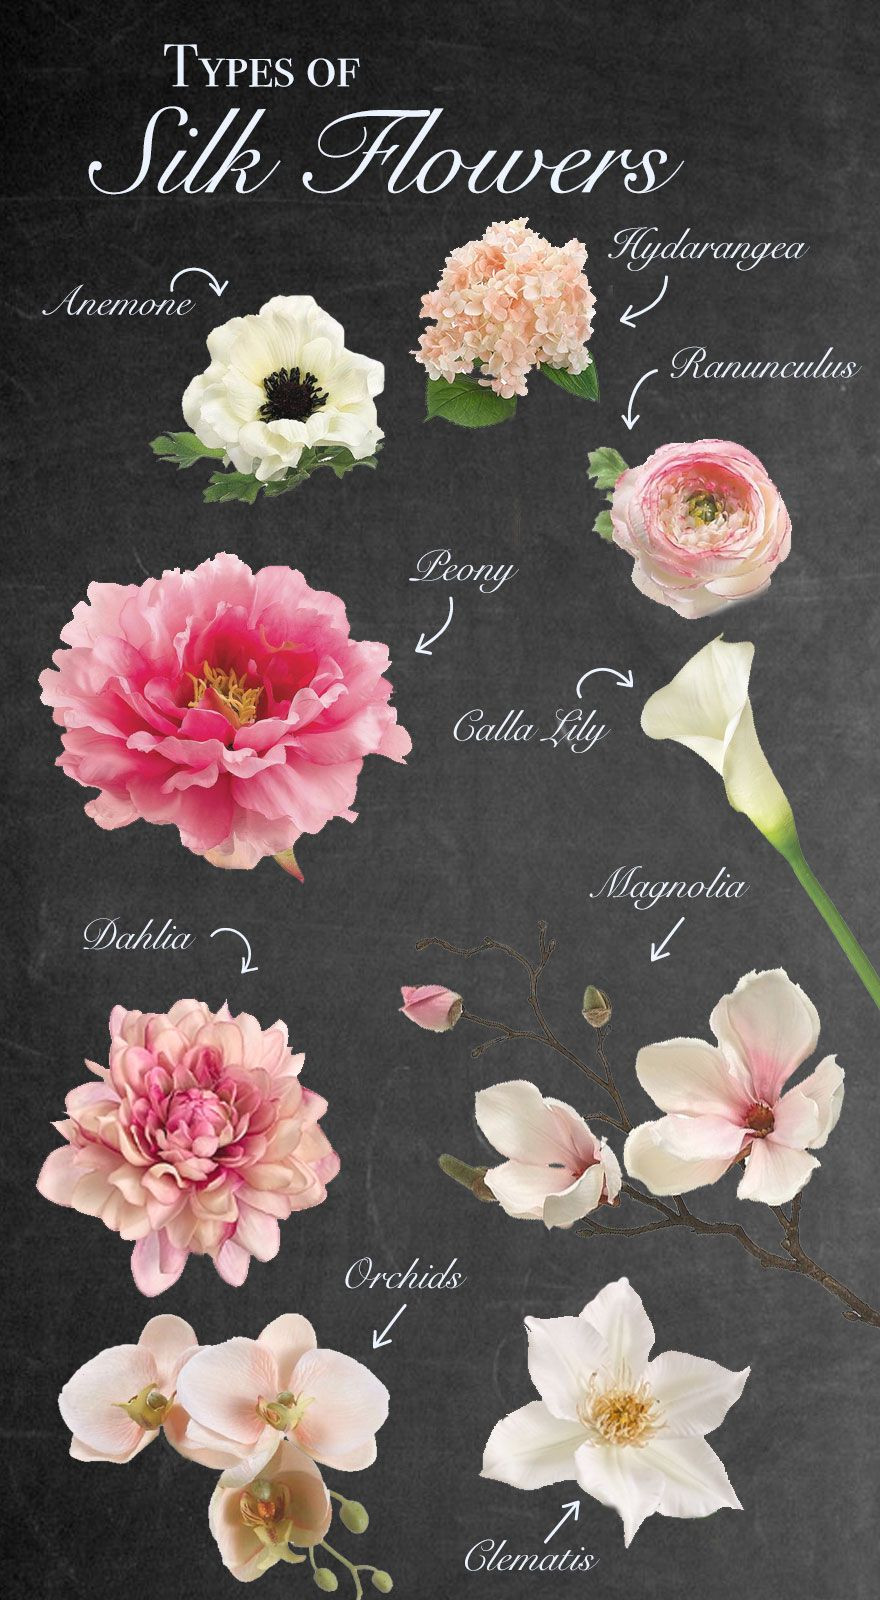 Types Of Flowers For Weddings
 A Guide to Silk Wedding Flowers from Afloral afloral